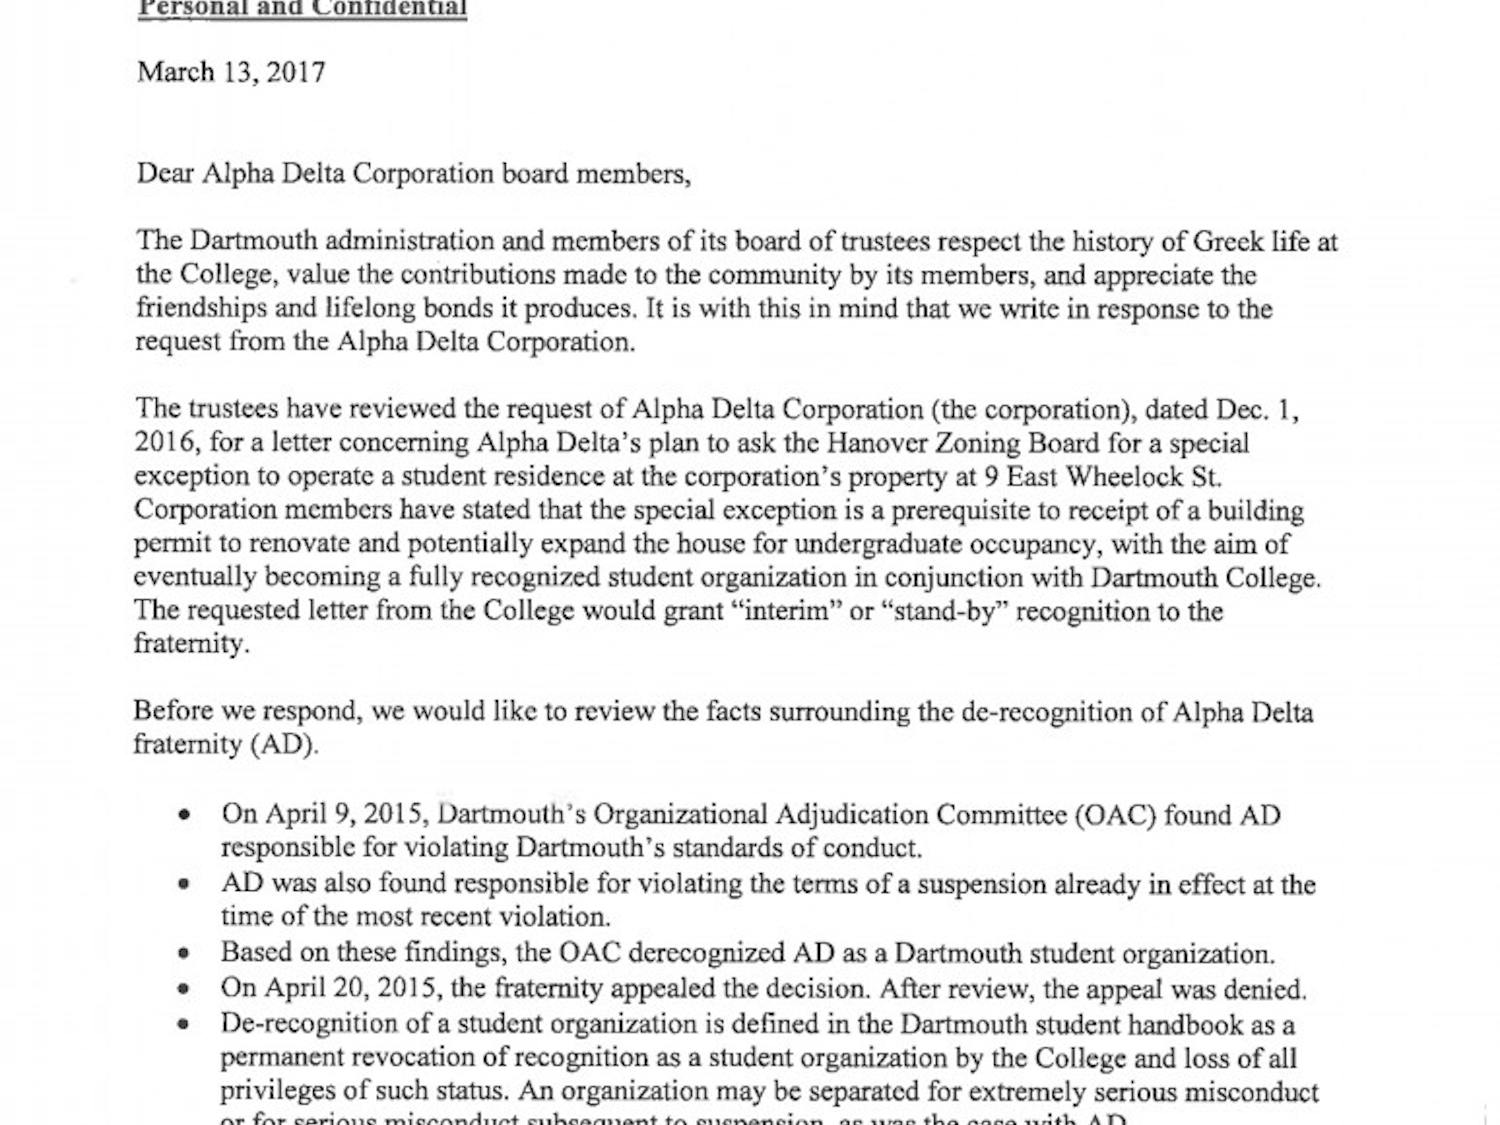 letter from Board of Trustees to the Alpha Delta Corporation, March 13, 2017